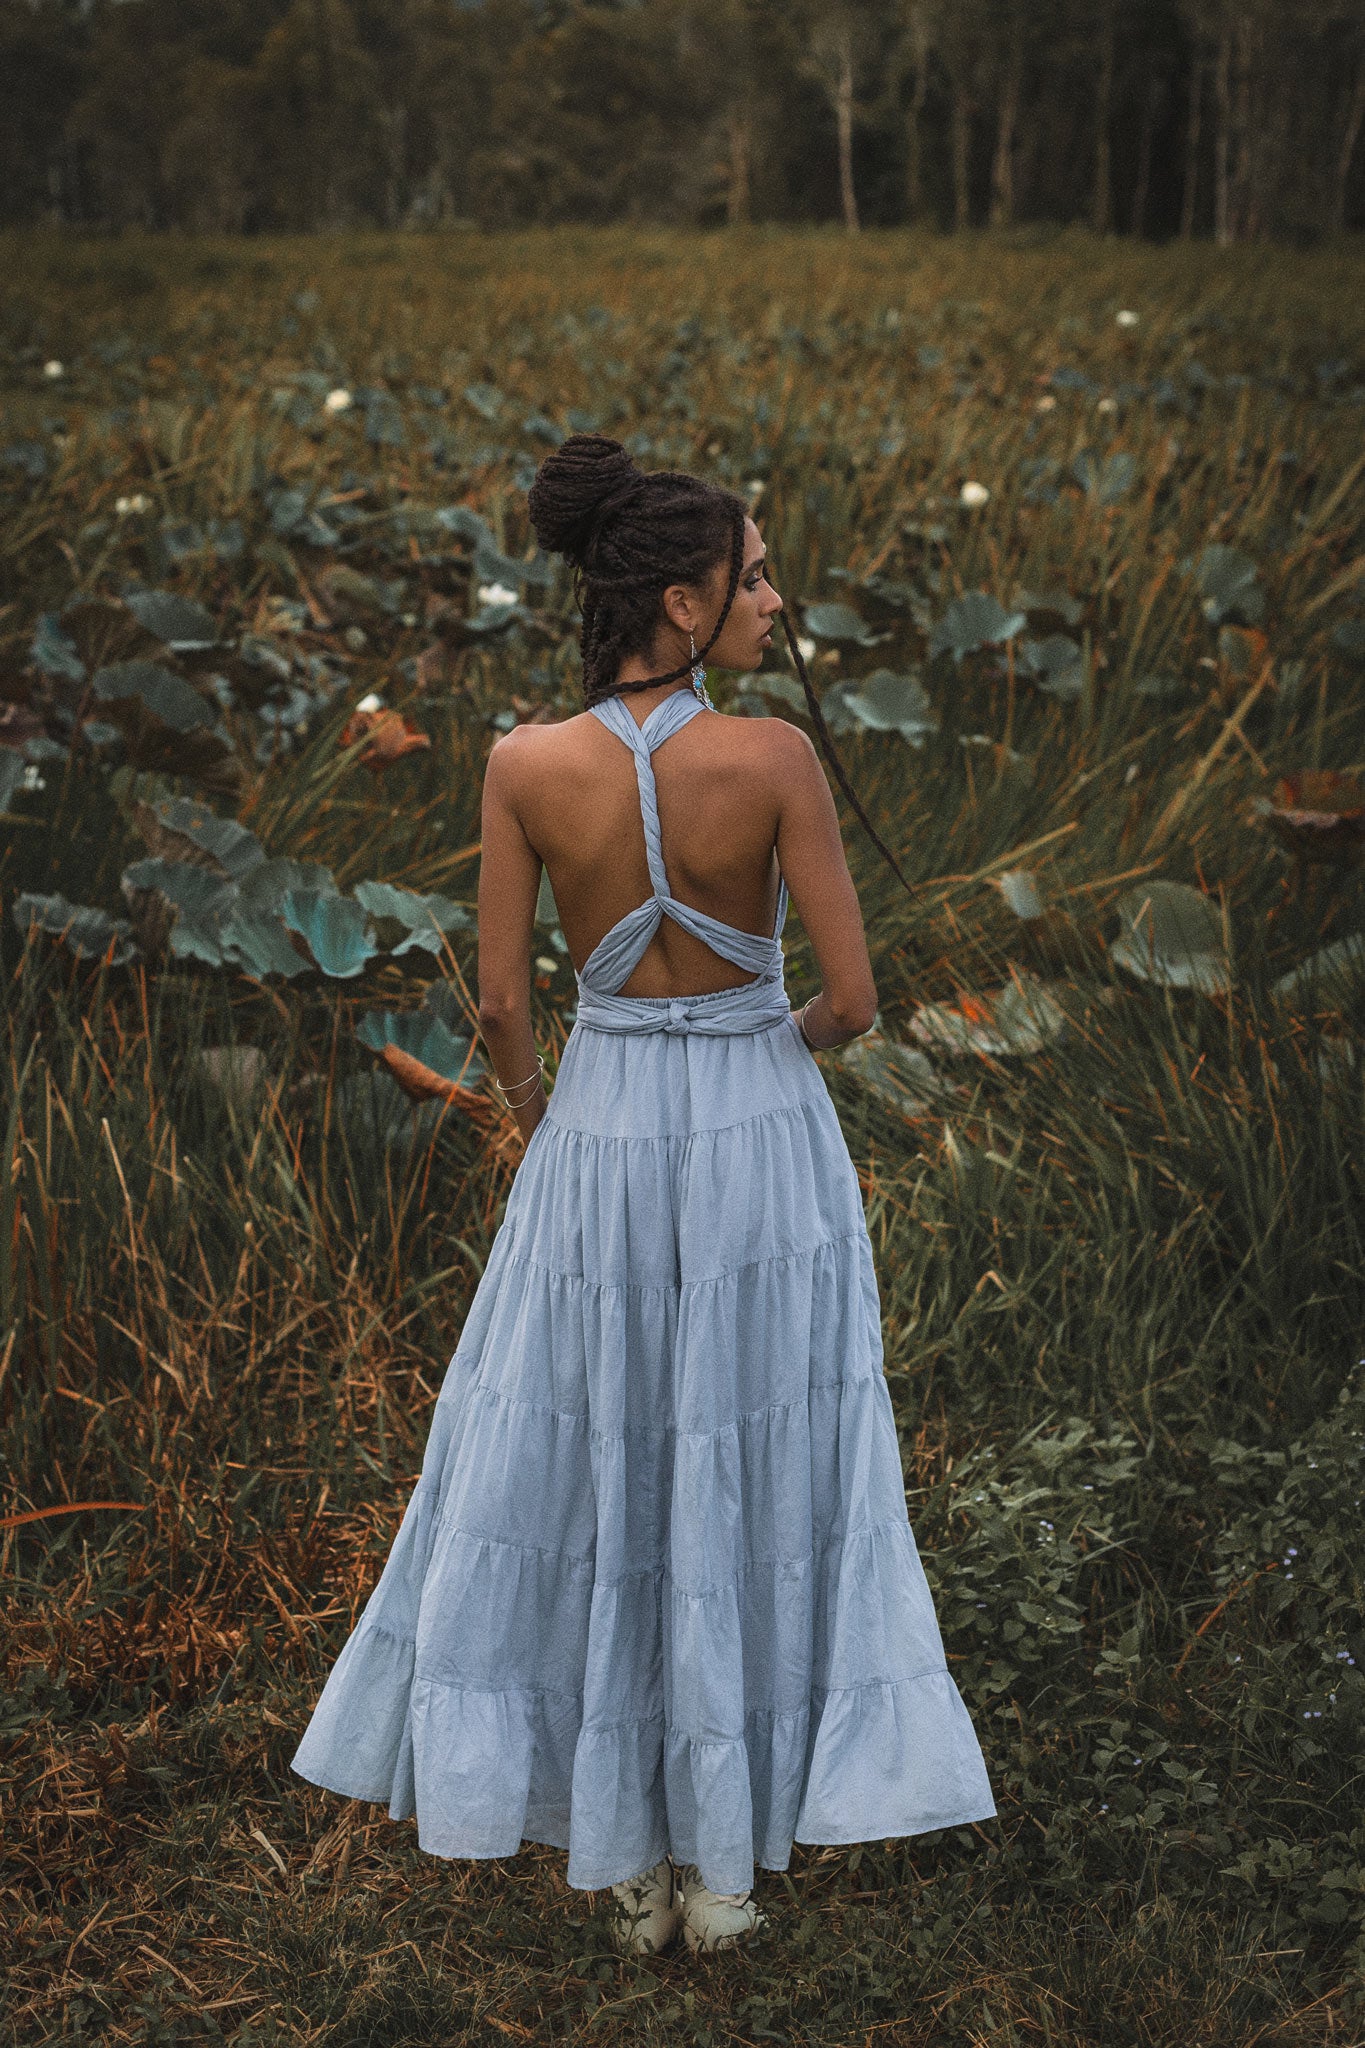 This light blue bohemian dress is perfect for any formal or informal event. The open back and adjustable straps make it both comfortable and stylish.